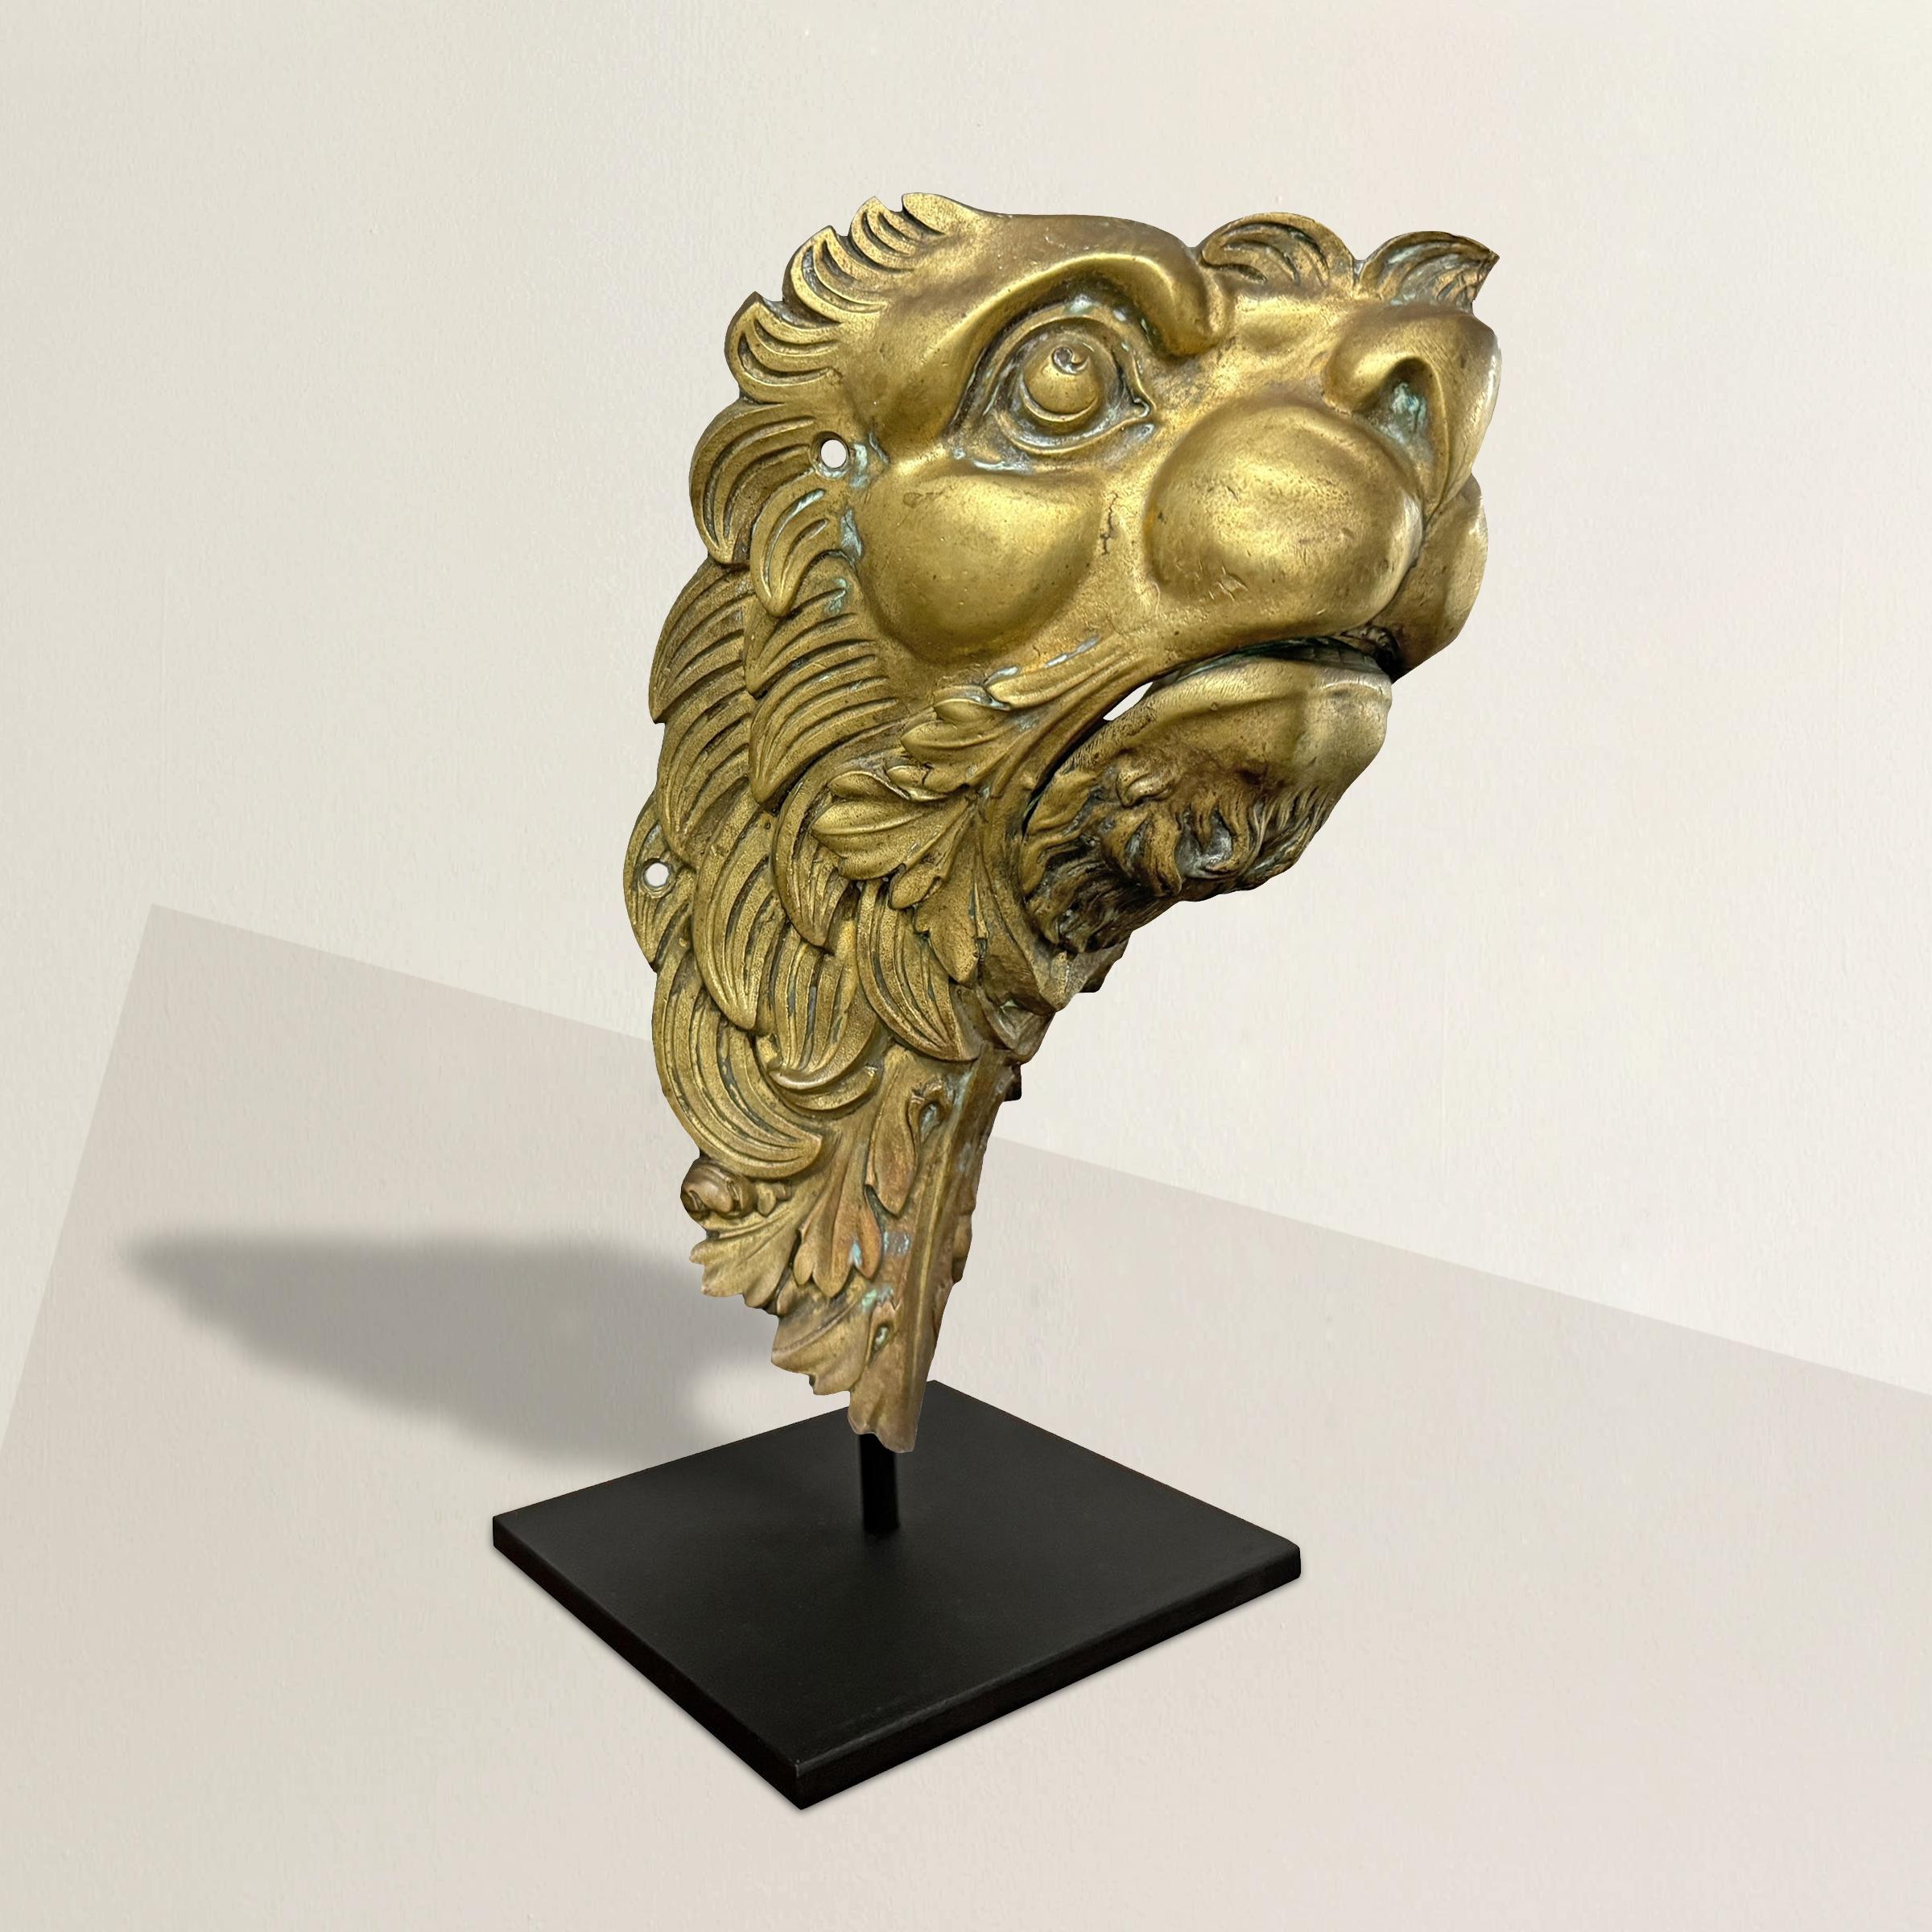 This 19th-century French gilt bronze billiard table ball return is a masterpiece of craftsmanship, expertly cast in the form of a majestic lion. Its intricate details capture the lion's regal presence, with its mouth cleverly designed to open and